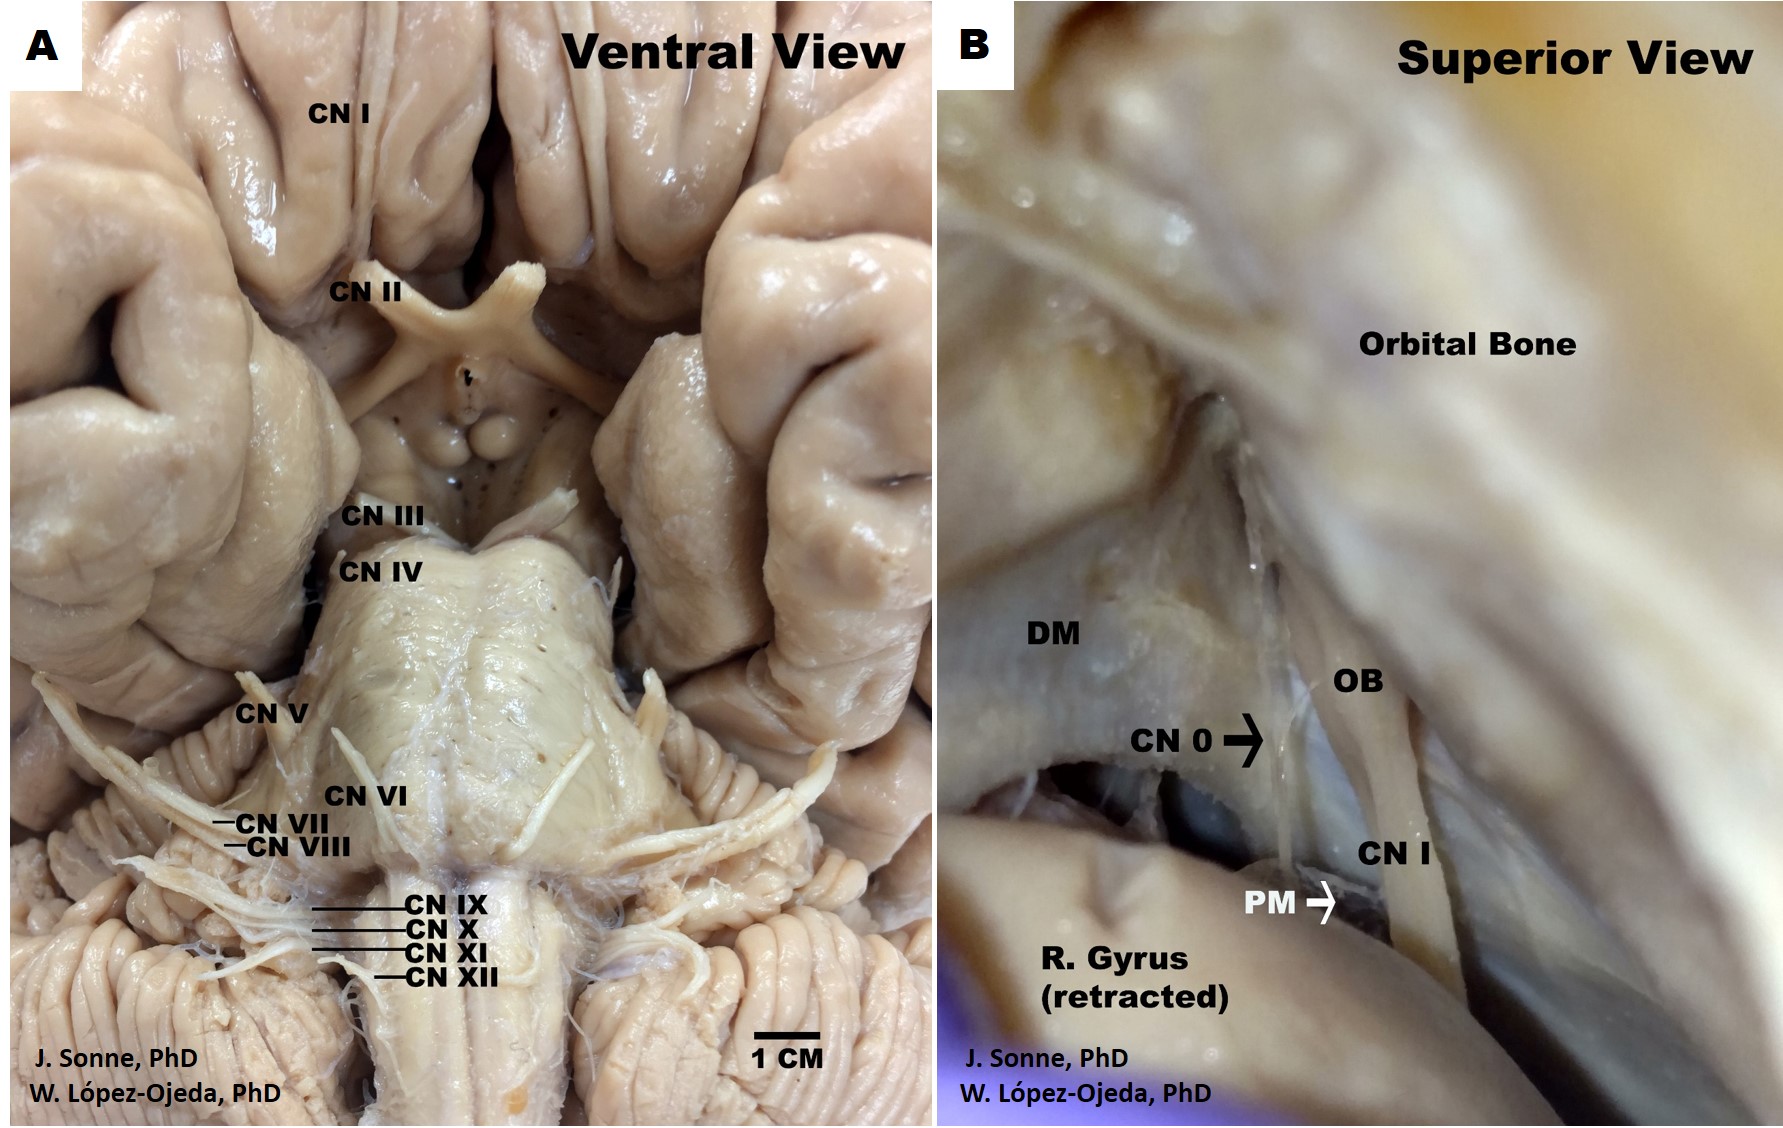 Figure 1A-B. Human brain cranial nerves. A. Ventral view of the human brain depicting the canonical organization of the 12 pairs of cranial nerves (CN) as described in the classical medical nomenclature, Roman numerals (I-XII) are used in progressive order to identify the rostro-caudal organization of the 12 pairs of cranial nerves, B. Superior view of the human skull and frontal brain lobe following a special dissection procedure to reveal the intact cranial nerve zero (CN 0) (black arrow). DM= dura matter, OB= olfactory bulb, PM= pia matter.